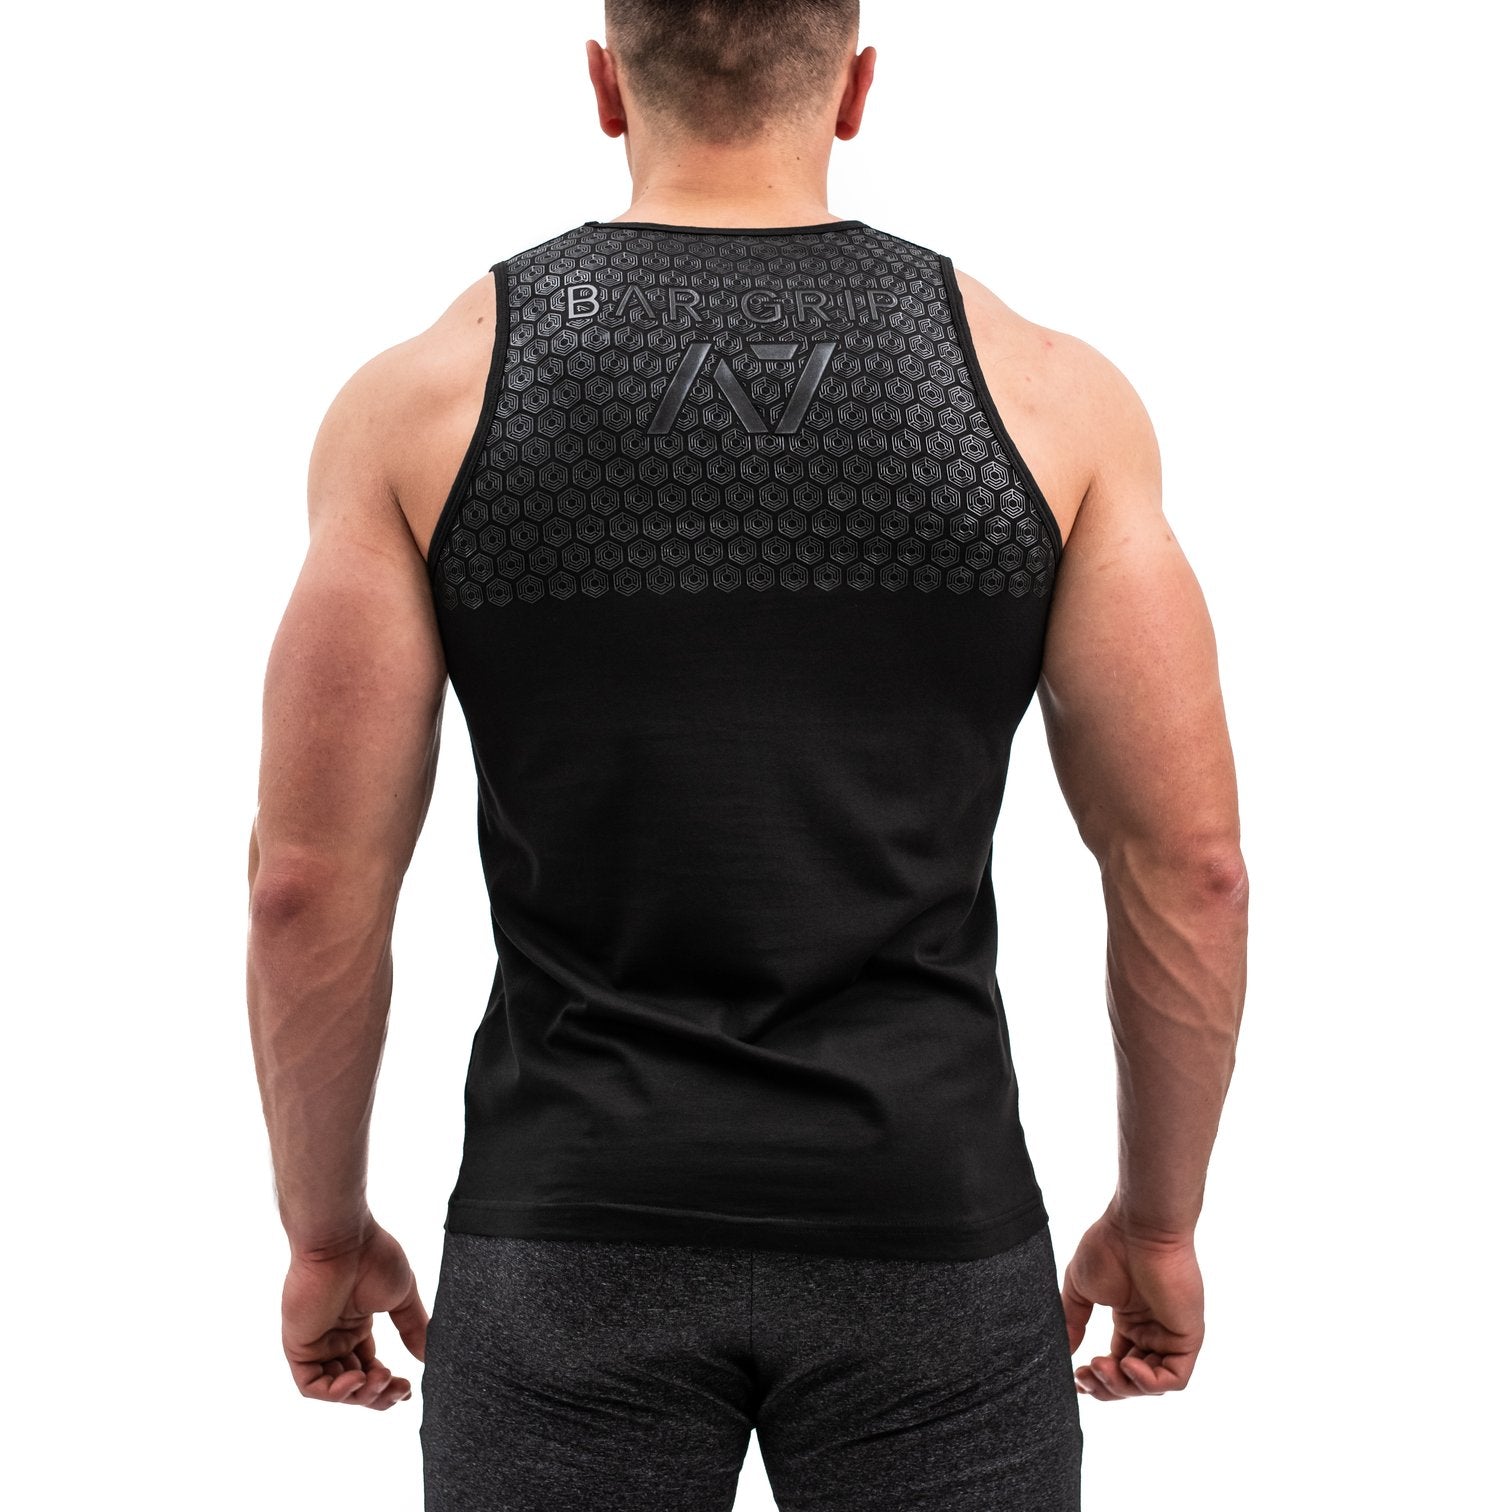 Stealth Bar Grip Tank, great as a squat shirt. Purchase Stealth Bar Grip tank UK from A7 UK. Purchase Stealth Bar Grip Tank Europe from A7 UK. No more chalk and no more sliding. Best Bar Grip Tank Tshirts, shipping to UK and Europe from A7 UK. Stealth is our classic black on black shirt design! The best Powerlifting apparel for all your workouts. Available in UK and Europe including France, Italy, Germany, Sweden and Poland